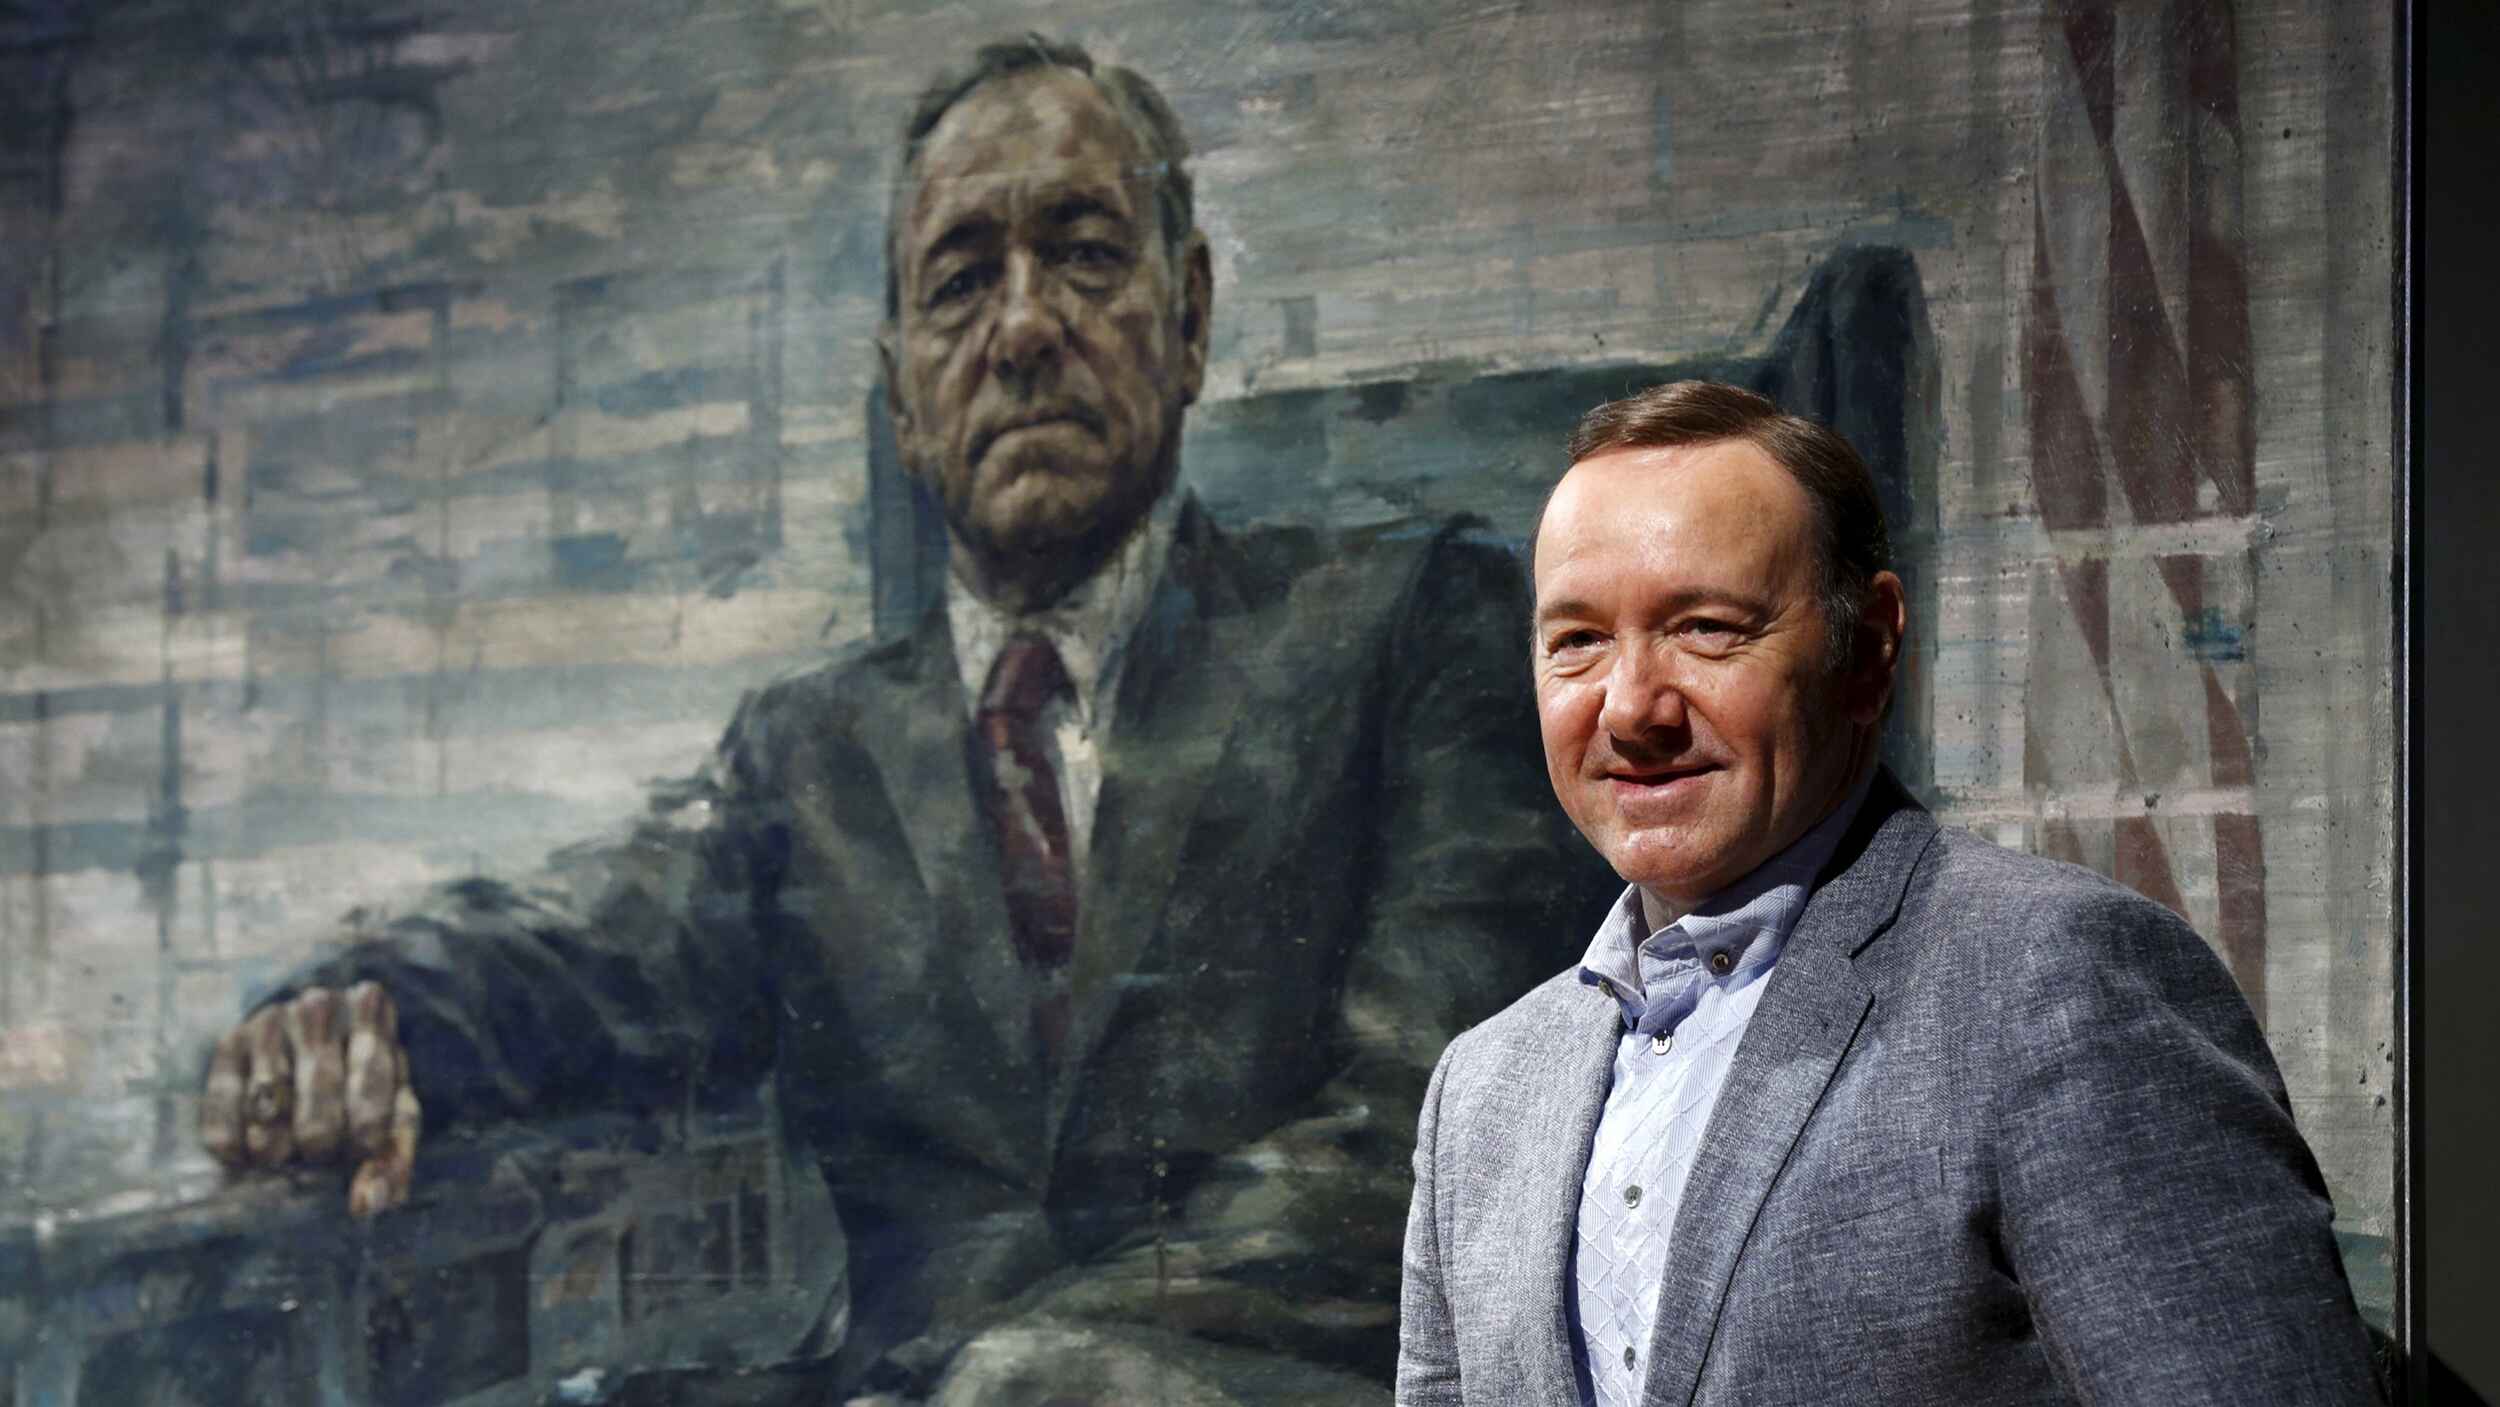 kevin-spacey-teases-presidential-run-in-character-as-frank-underwood